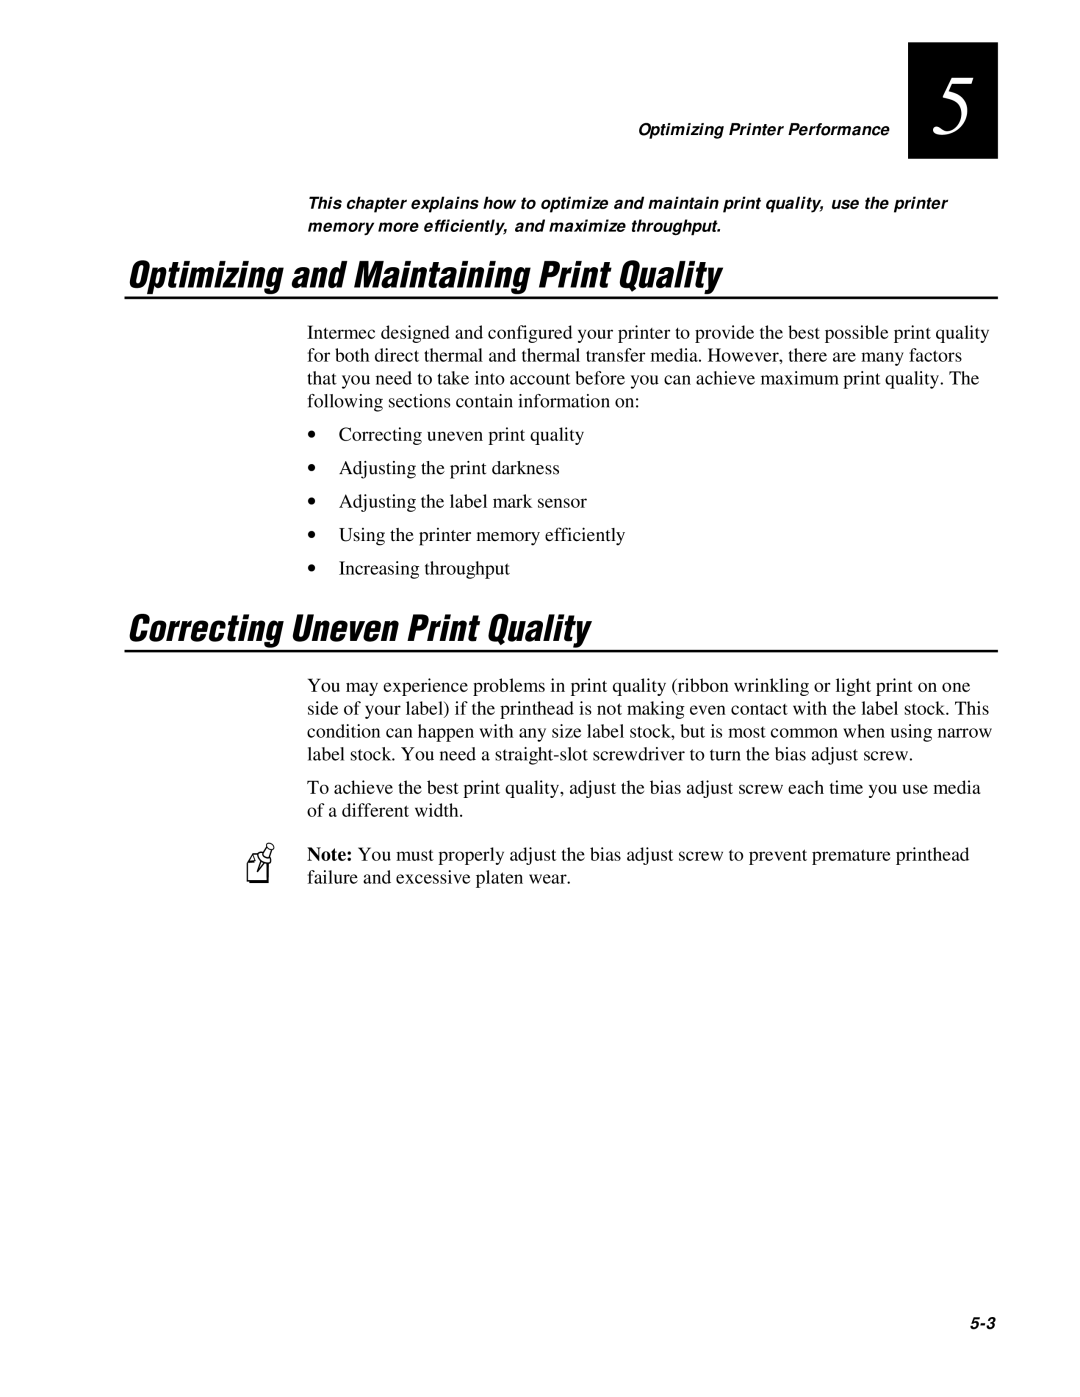 IBM EasyCoder 3400e user manual Optimizing and Maintaining Print Quality, Correcting Uneven Print Quality 